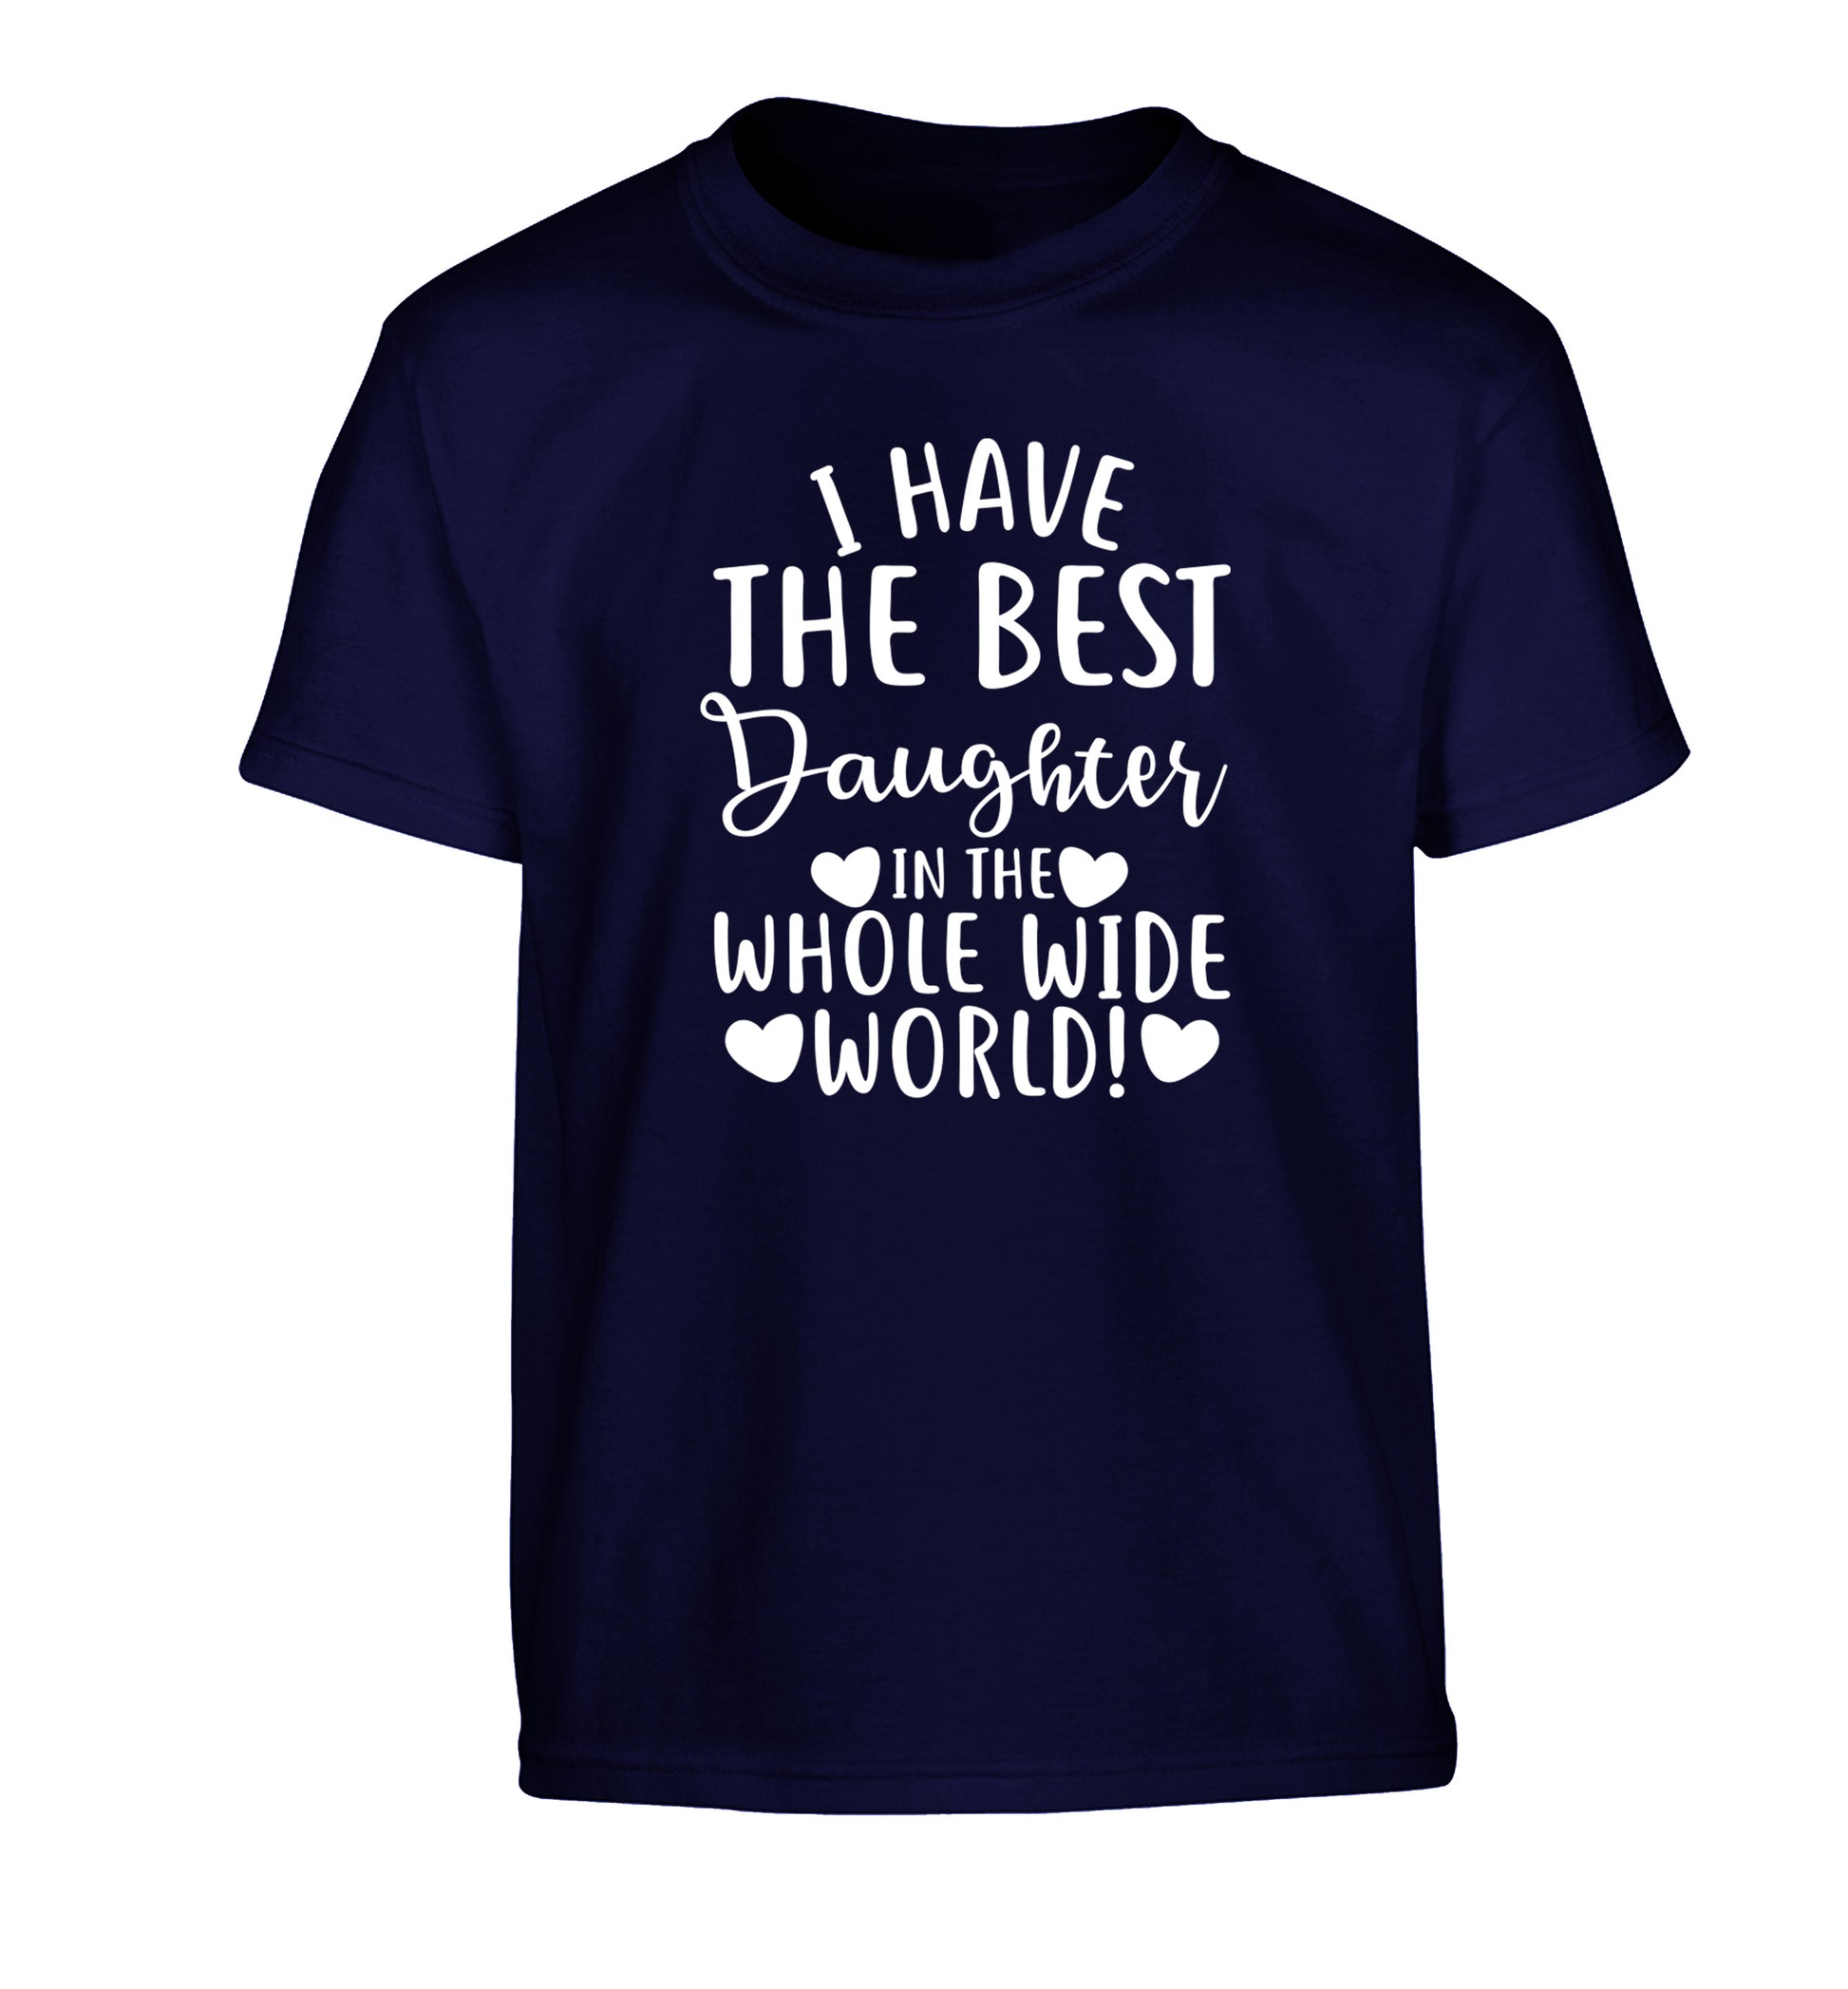 I have the best daughter in the whole wide world! Children's navy Tshirt 12-13 Years